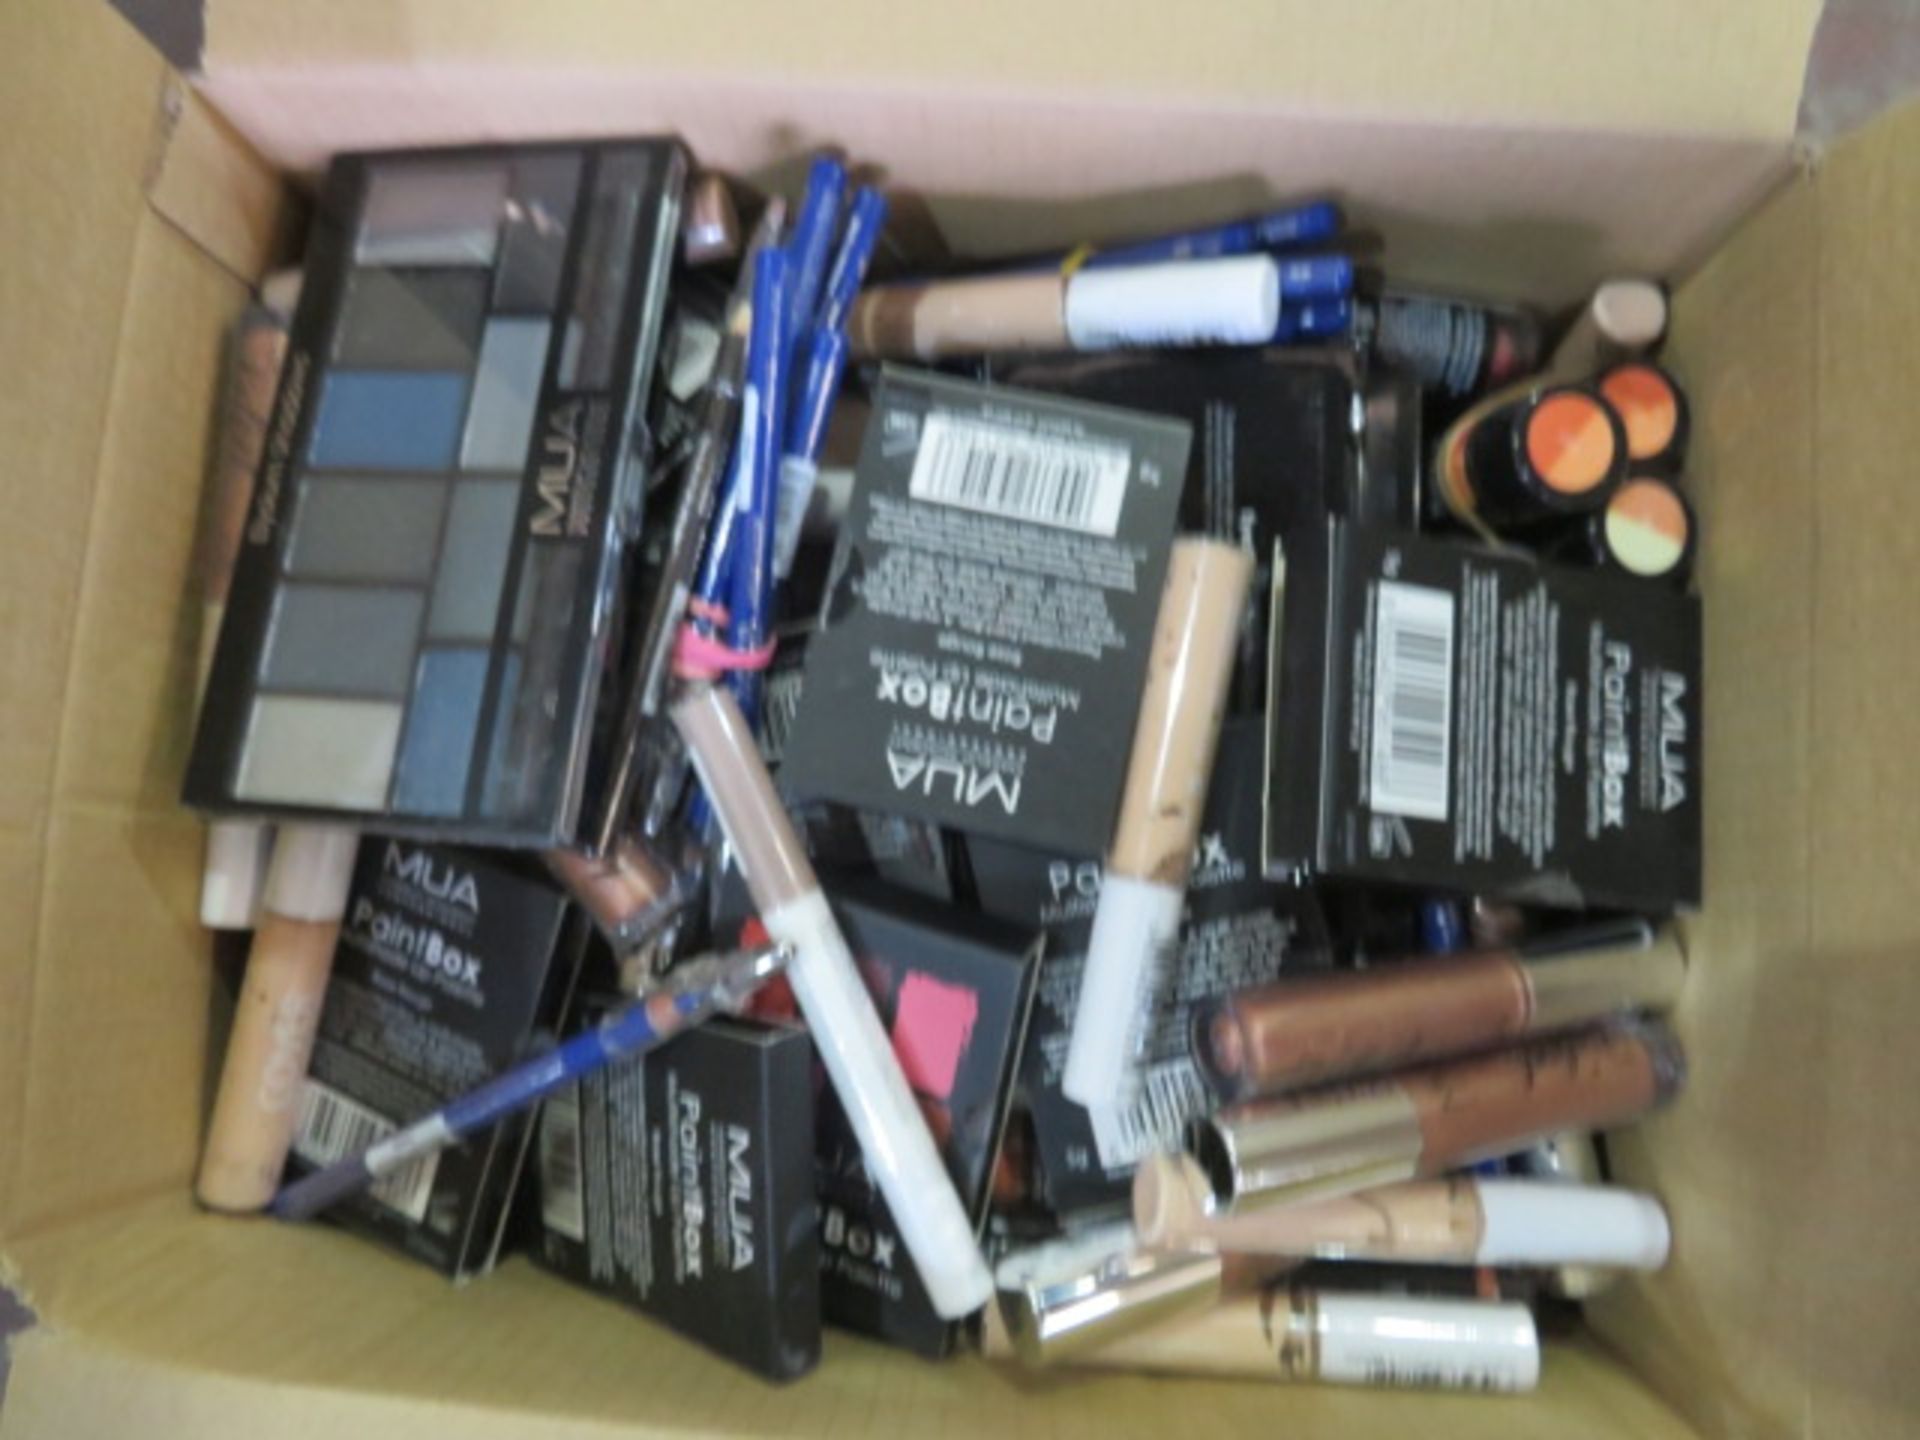 Circa. 200 items of various new make up acadamy make up to include: cover and conceal, lip line...